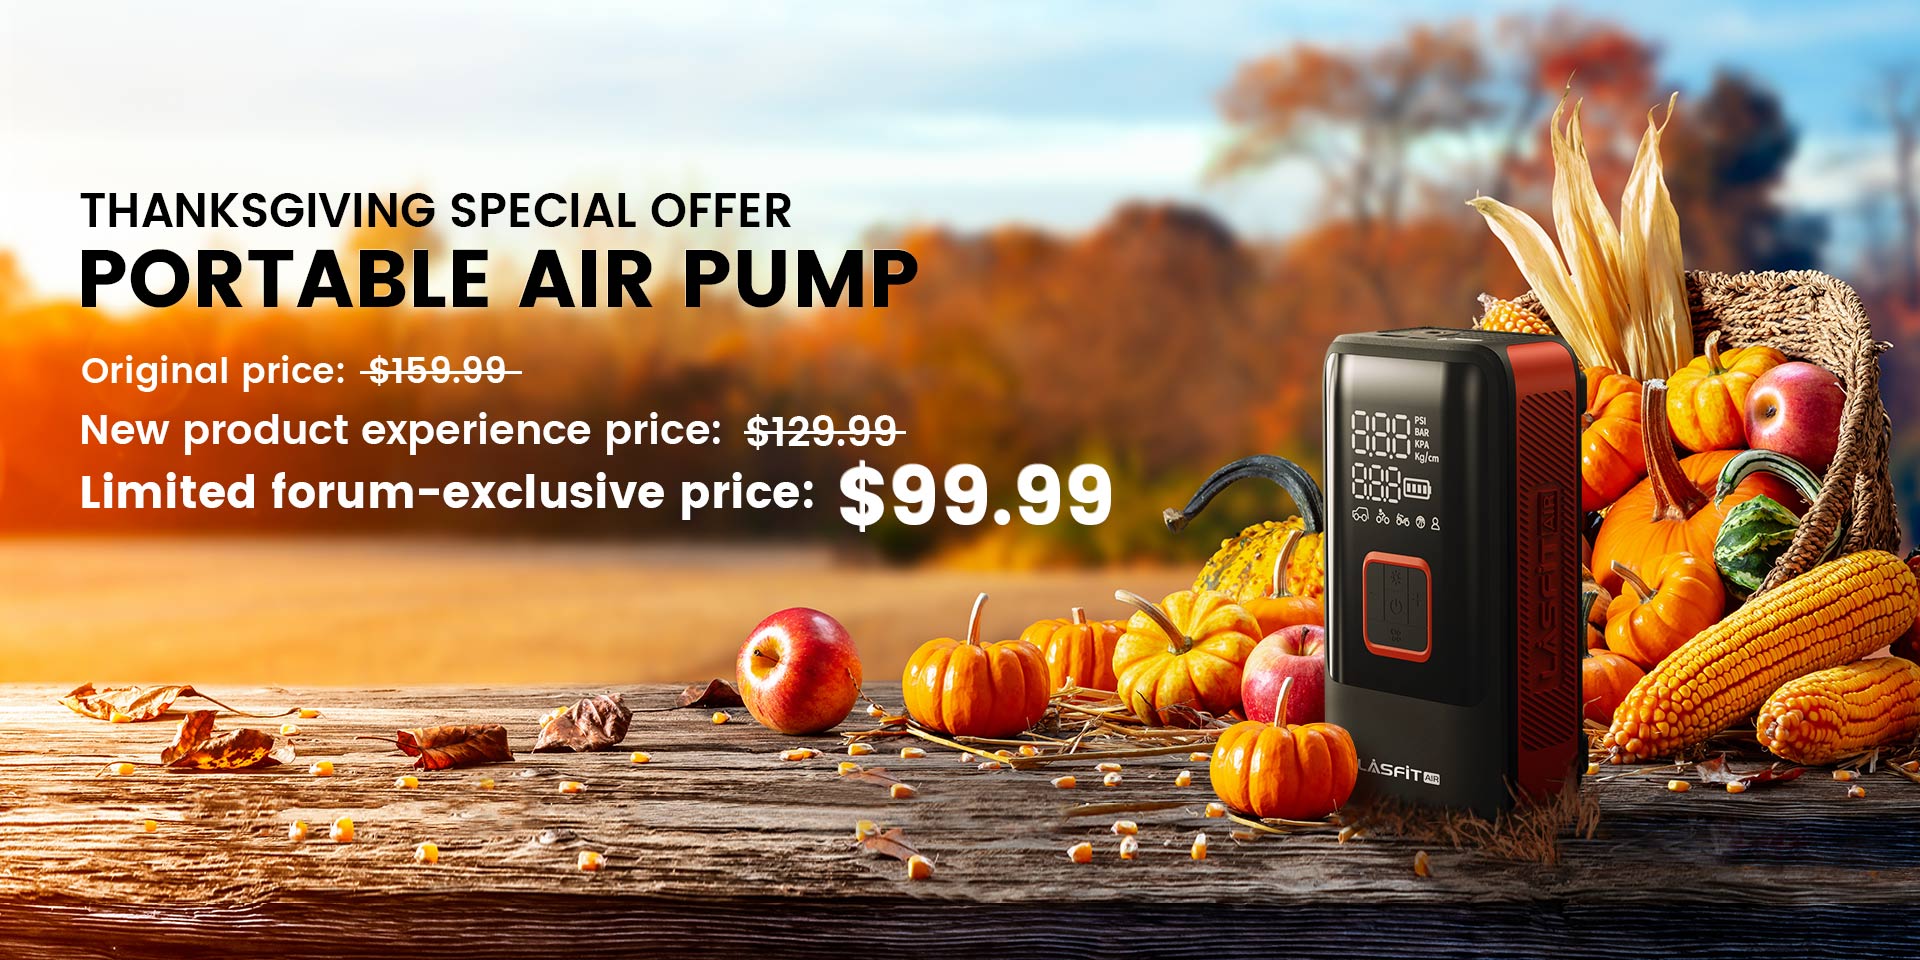 Ford F-150 Lightning 🎉 Thanksgiving Special Offer! Get $30 Off on Lasfit New Portable Air Pump! 10 Spots Limited! 1920x960